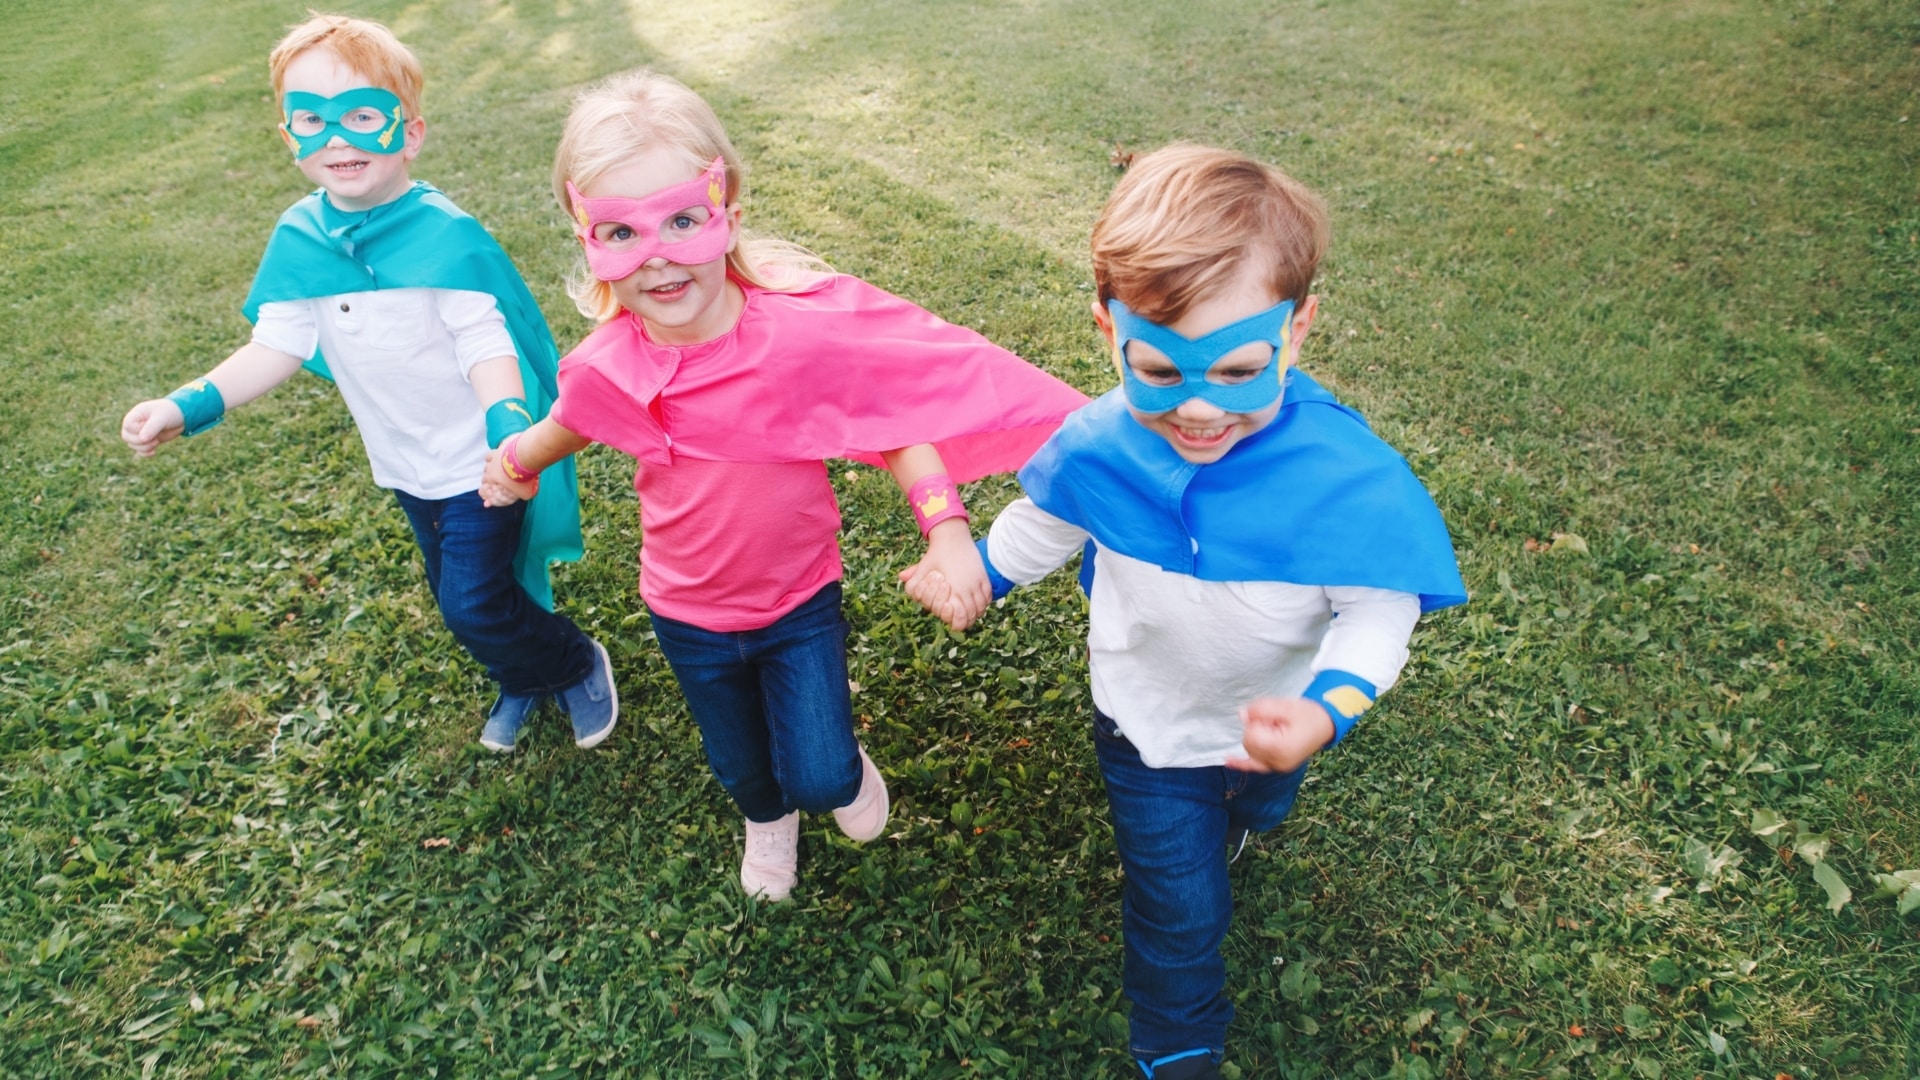 Superhero Convention for Everyone in the Family